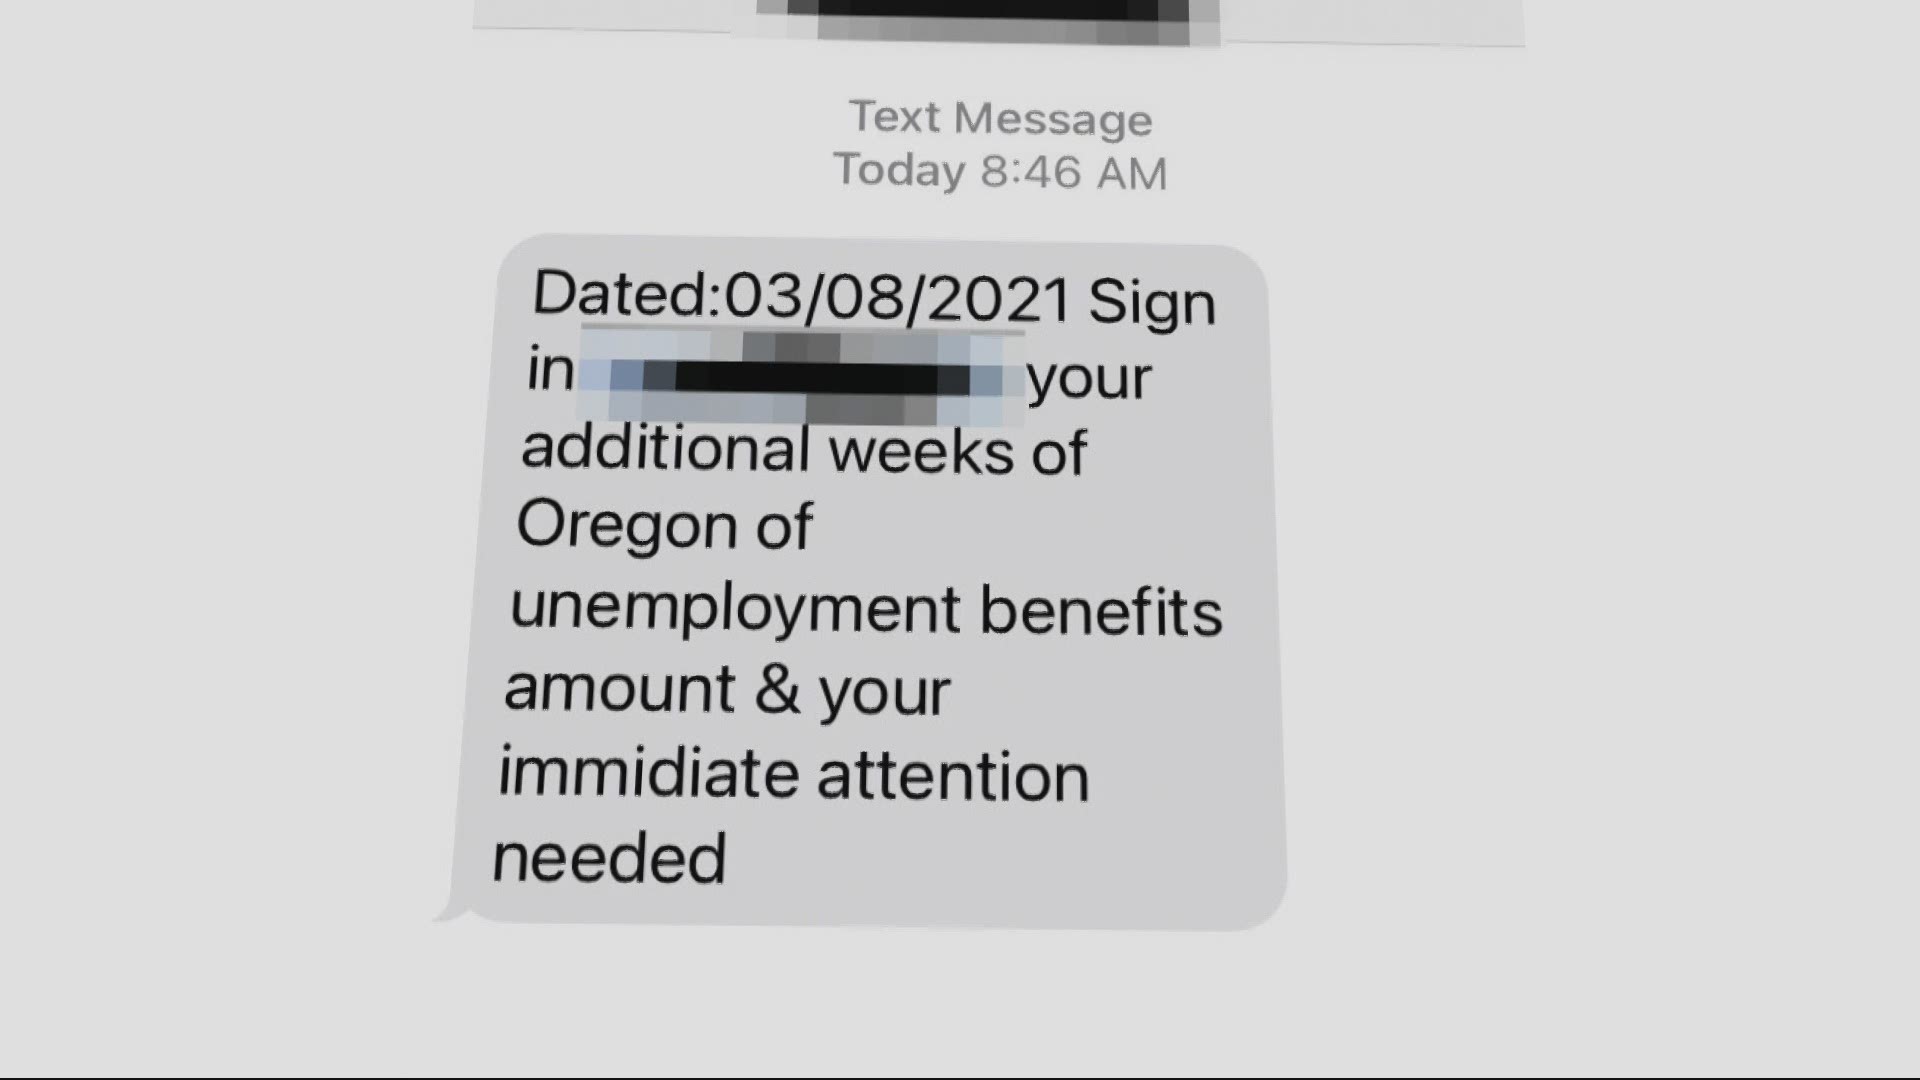 Experts warn phishing scams sent via text and email are preying on people hoping for a COVID-19 vaccine or financial help.